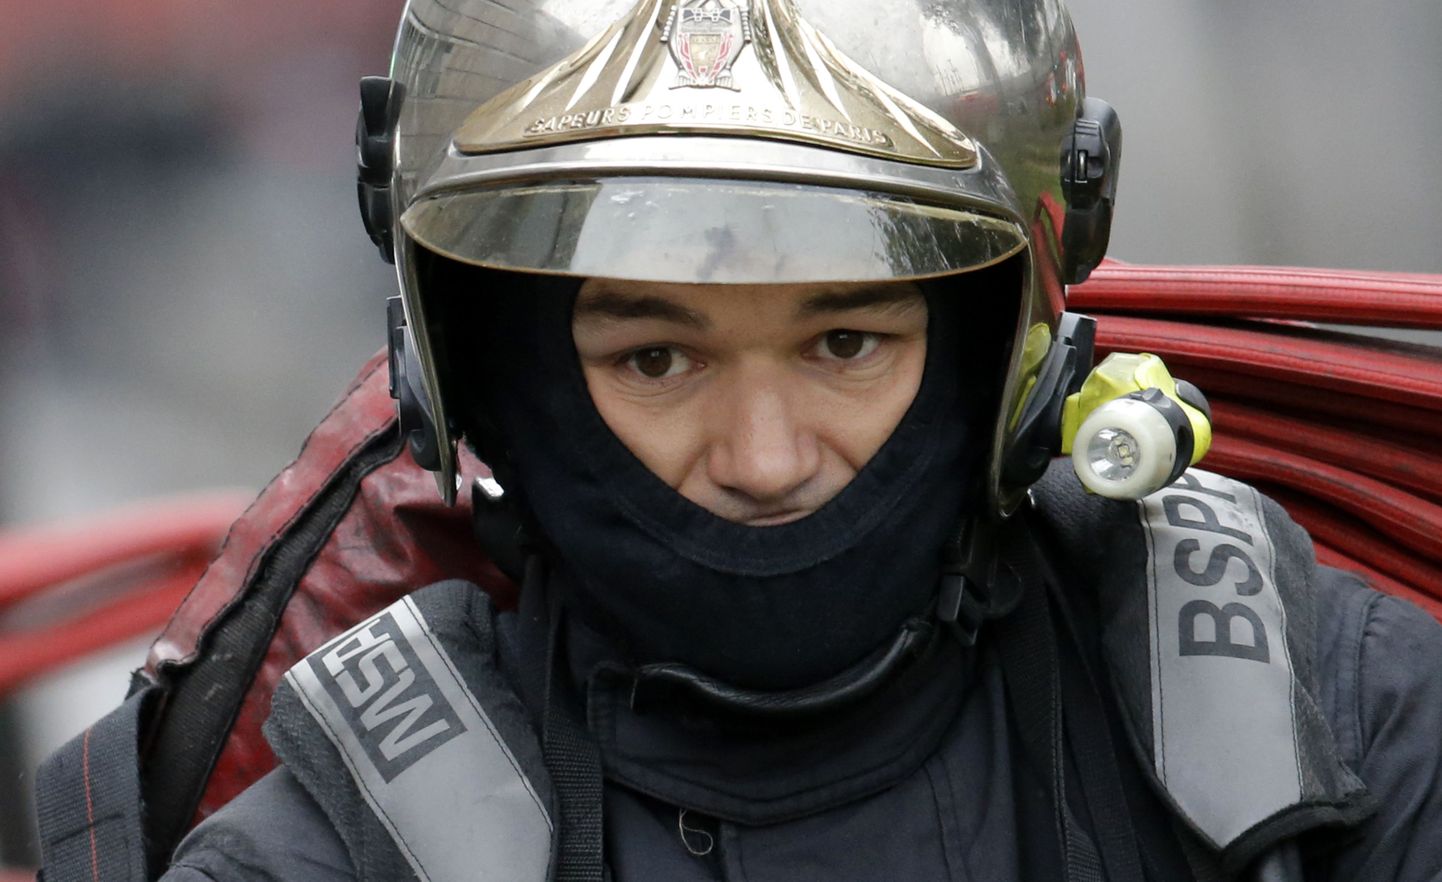 A French firefighter of Paris Fire Brigade (BSPP) is seen on site of the fire that broke-out overnight at the Cite des Sciences et Industries Museum at La Villette, in Paris, France, August 20, 2015. More than 10,000 square meters were hit by the fire that started in an area under construction. REUTERS/Christian Hartmann